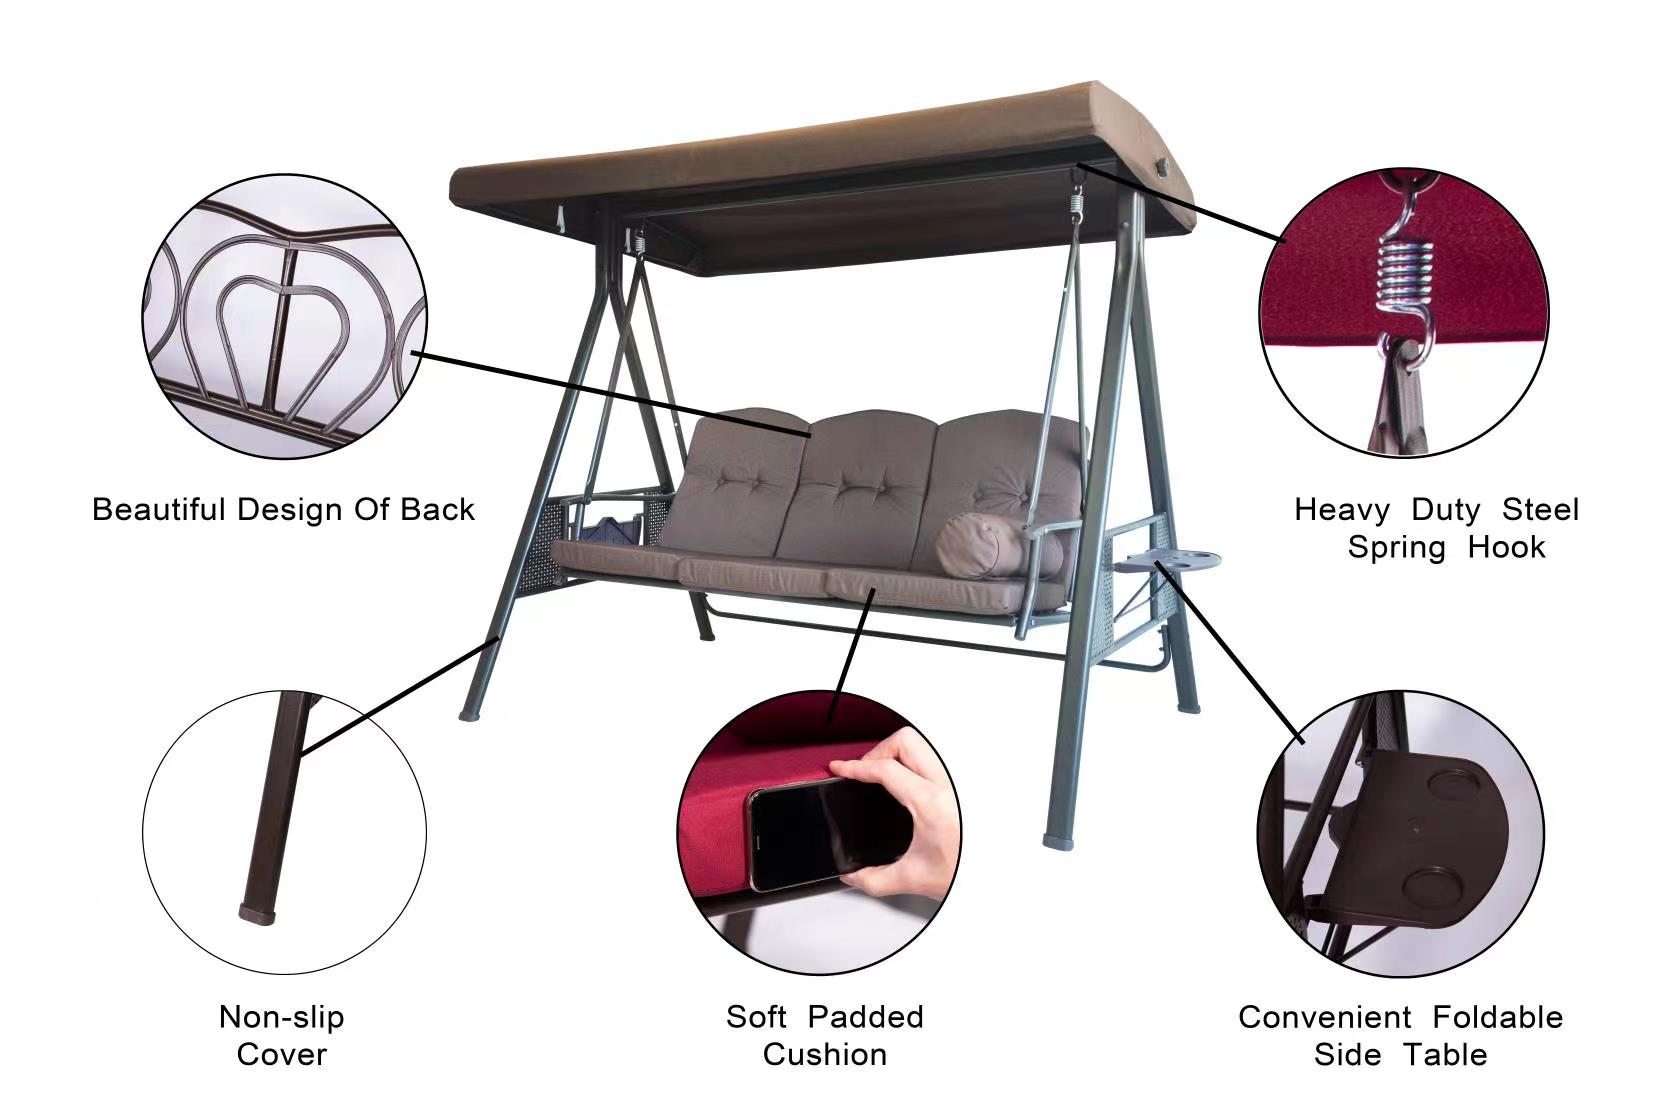 Luckyberry 3-Seat Outdoor Large Canopy Swing Glider, Porch Patio Hammock Lounge Chair, Backyard ,Garden Adjustable Shade, Removable Cushions - Brown… - image 5 of 6